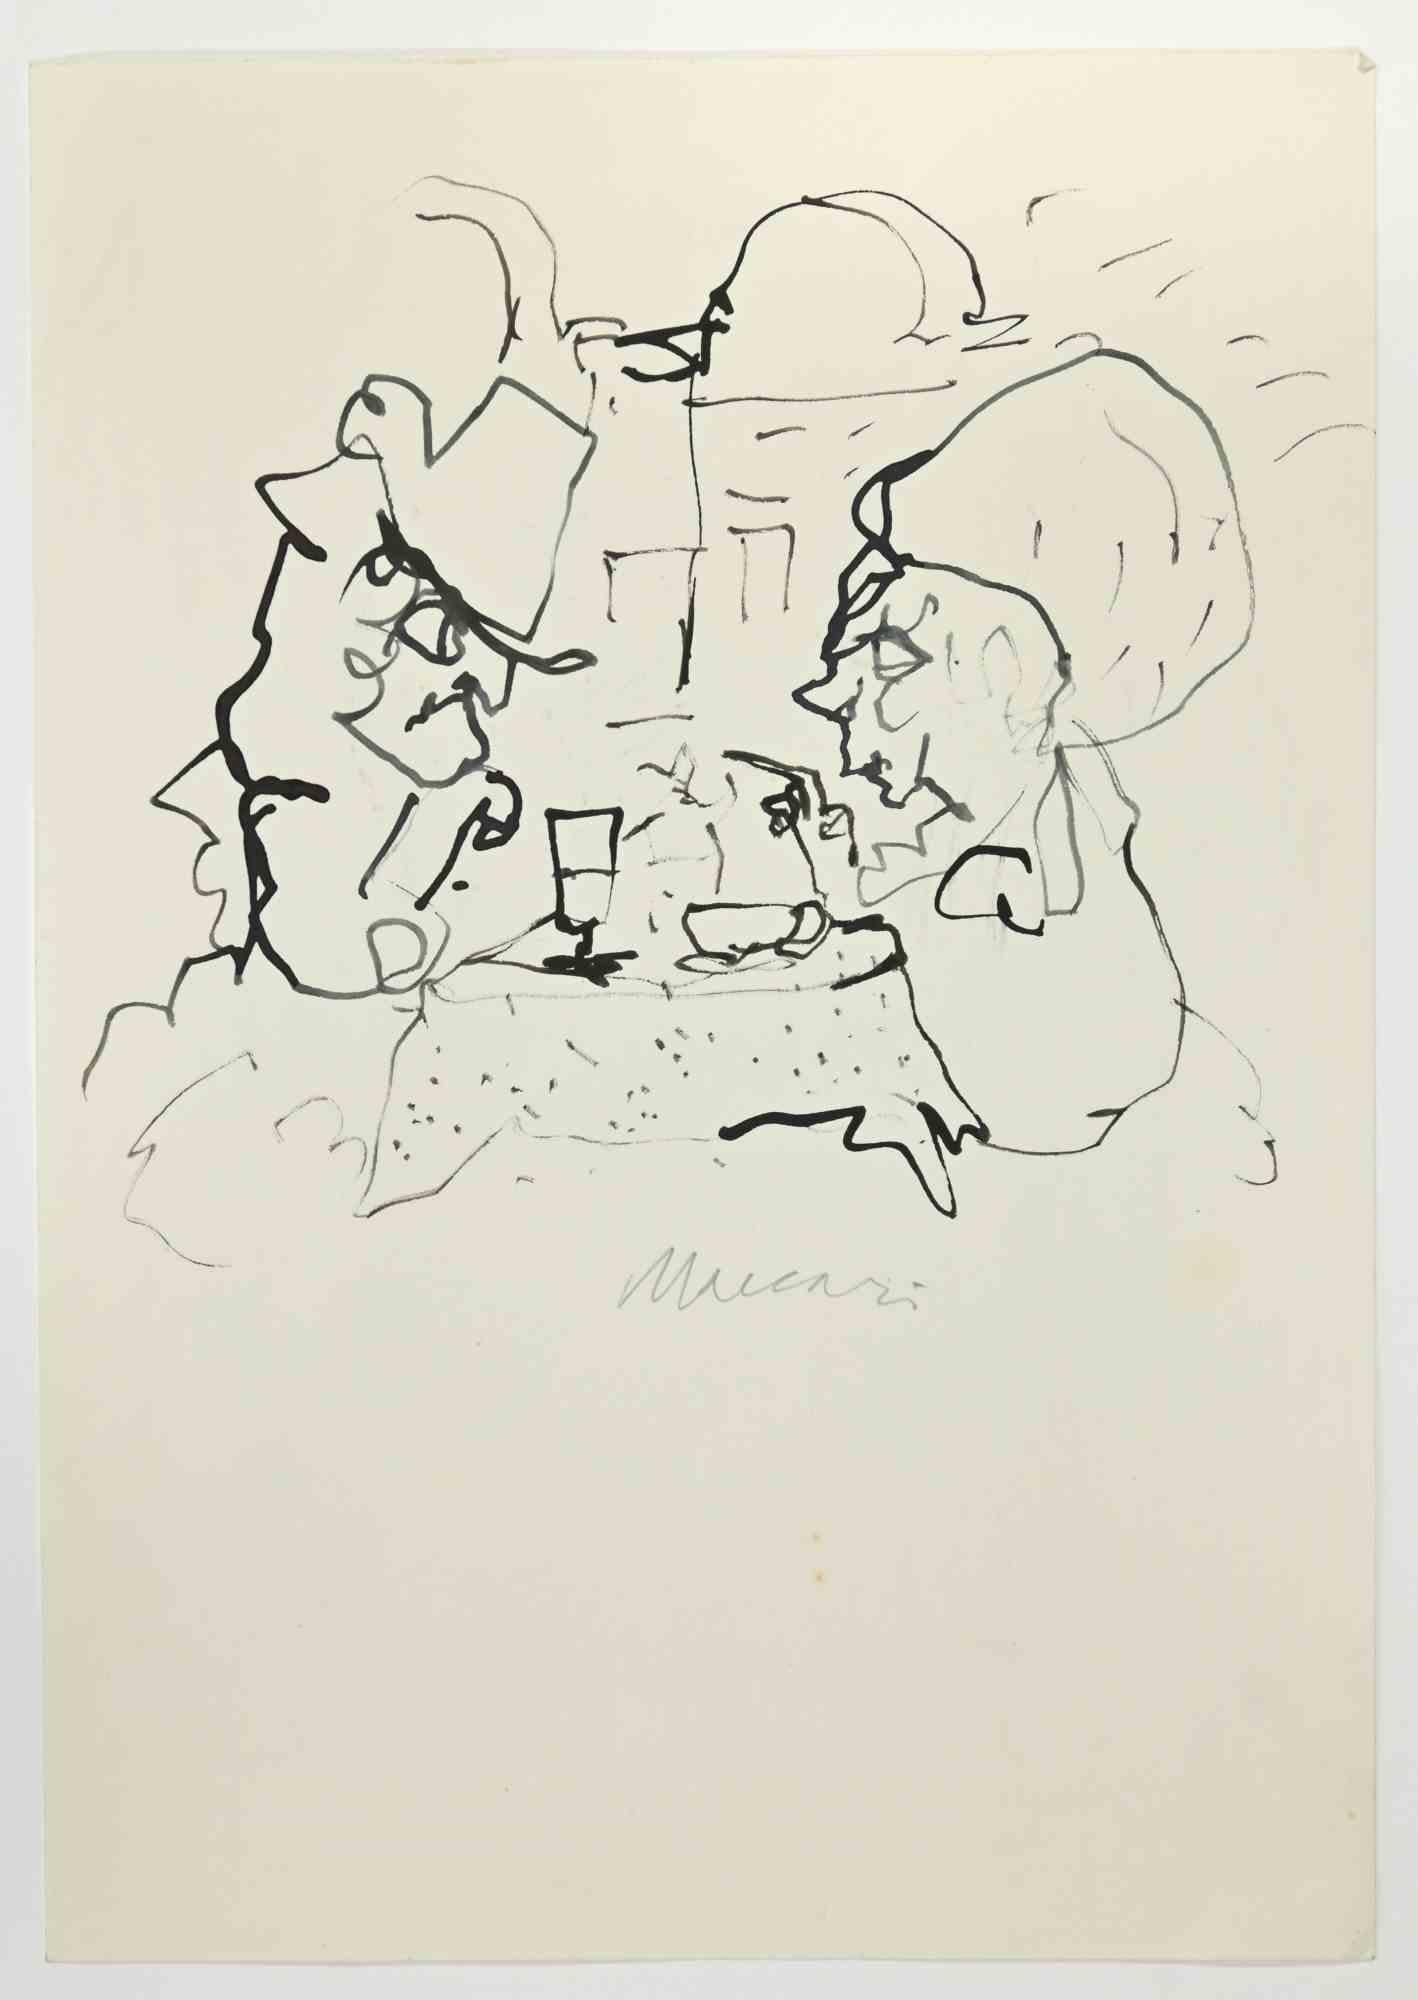 At the Bar is a China ink Drawing realized by Mino Maccari  (1924-1989) in the 1960s.

Hand-signed on the lower.

Good condition.

Mino Maccari (Siena, 1924-Rome, June 16, 1989) was an Italian writer, painter, engraver and journalist, winner of the